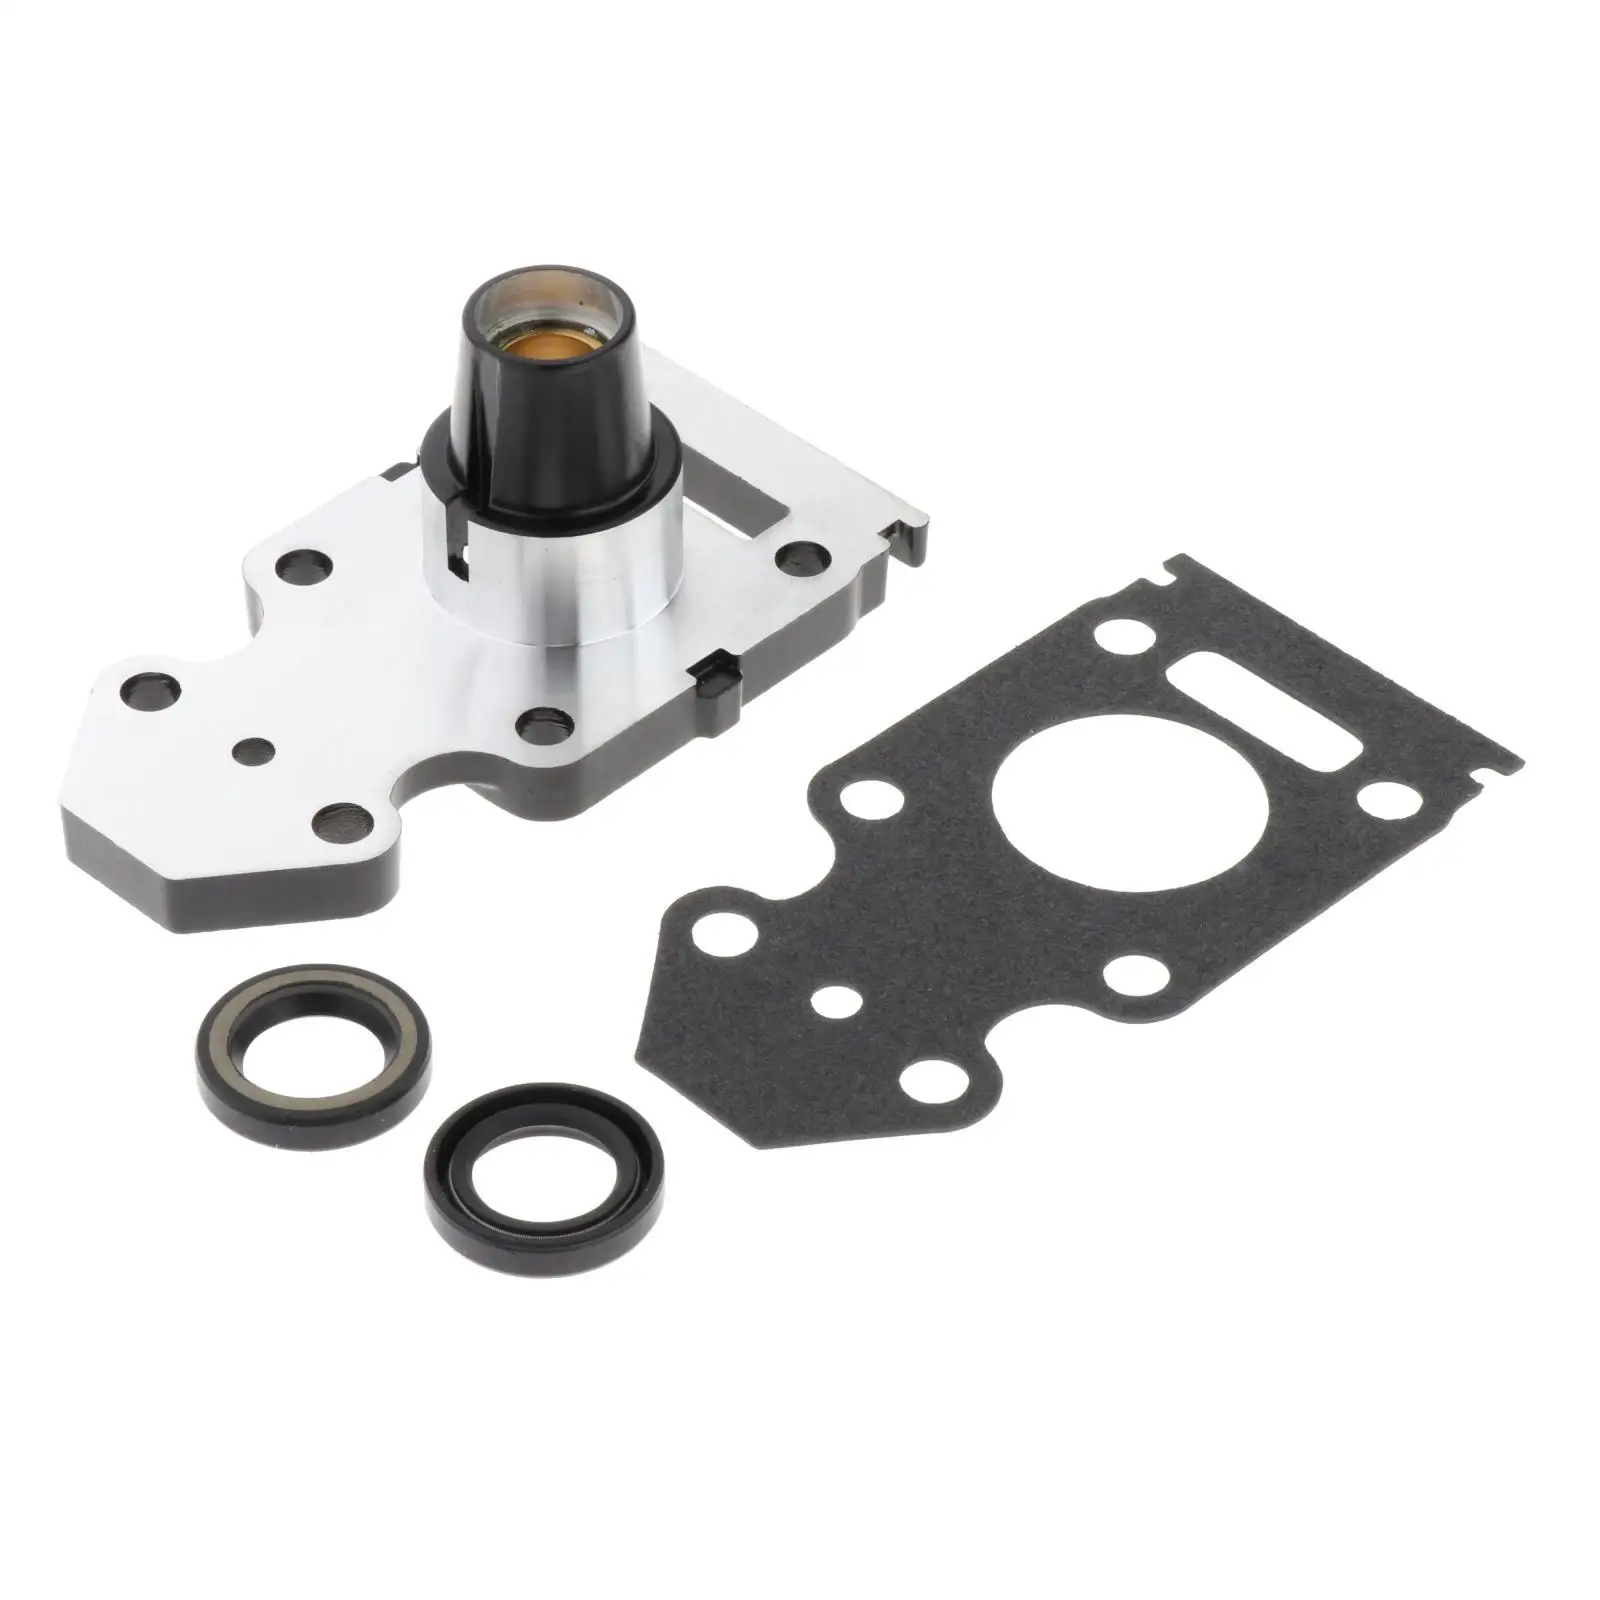 Housing Kit, with Oil Seal & Bush Boat Motor # 63V-45331-00-50001  Outboard 9.HP, for  Replacement.